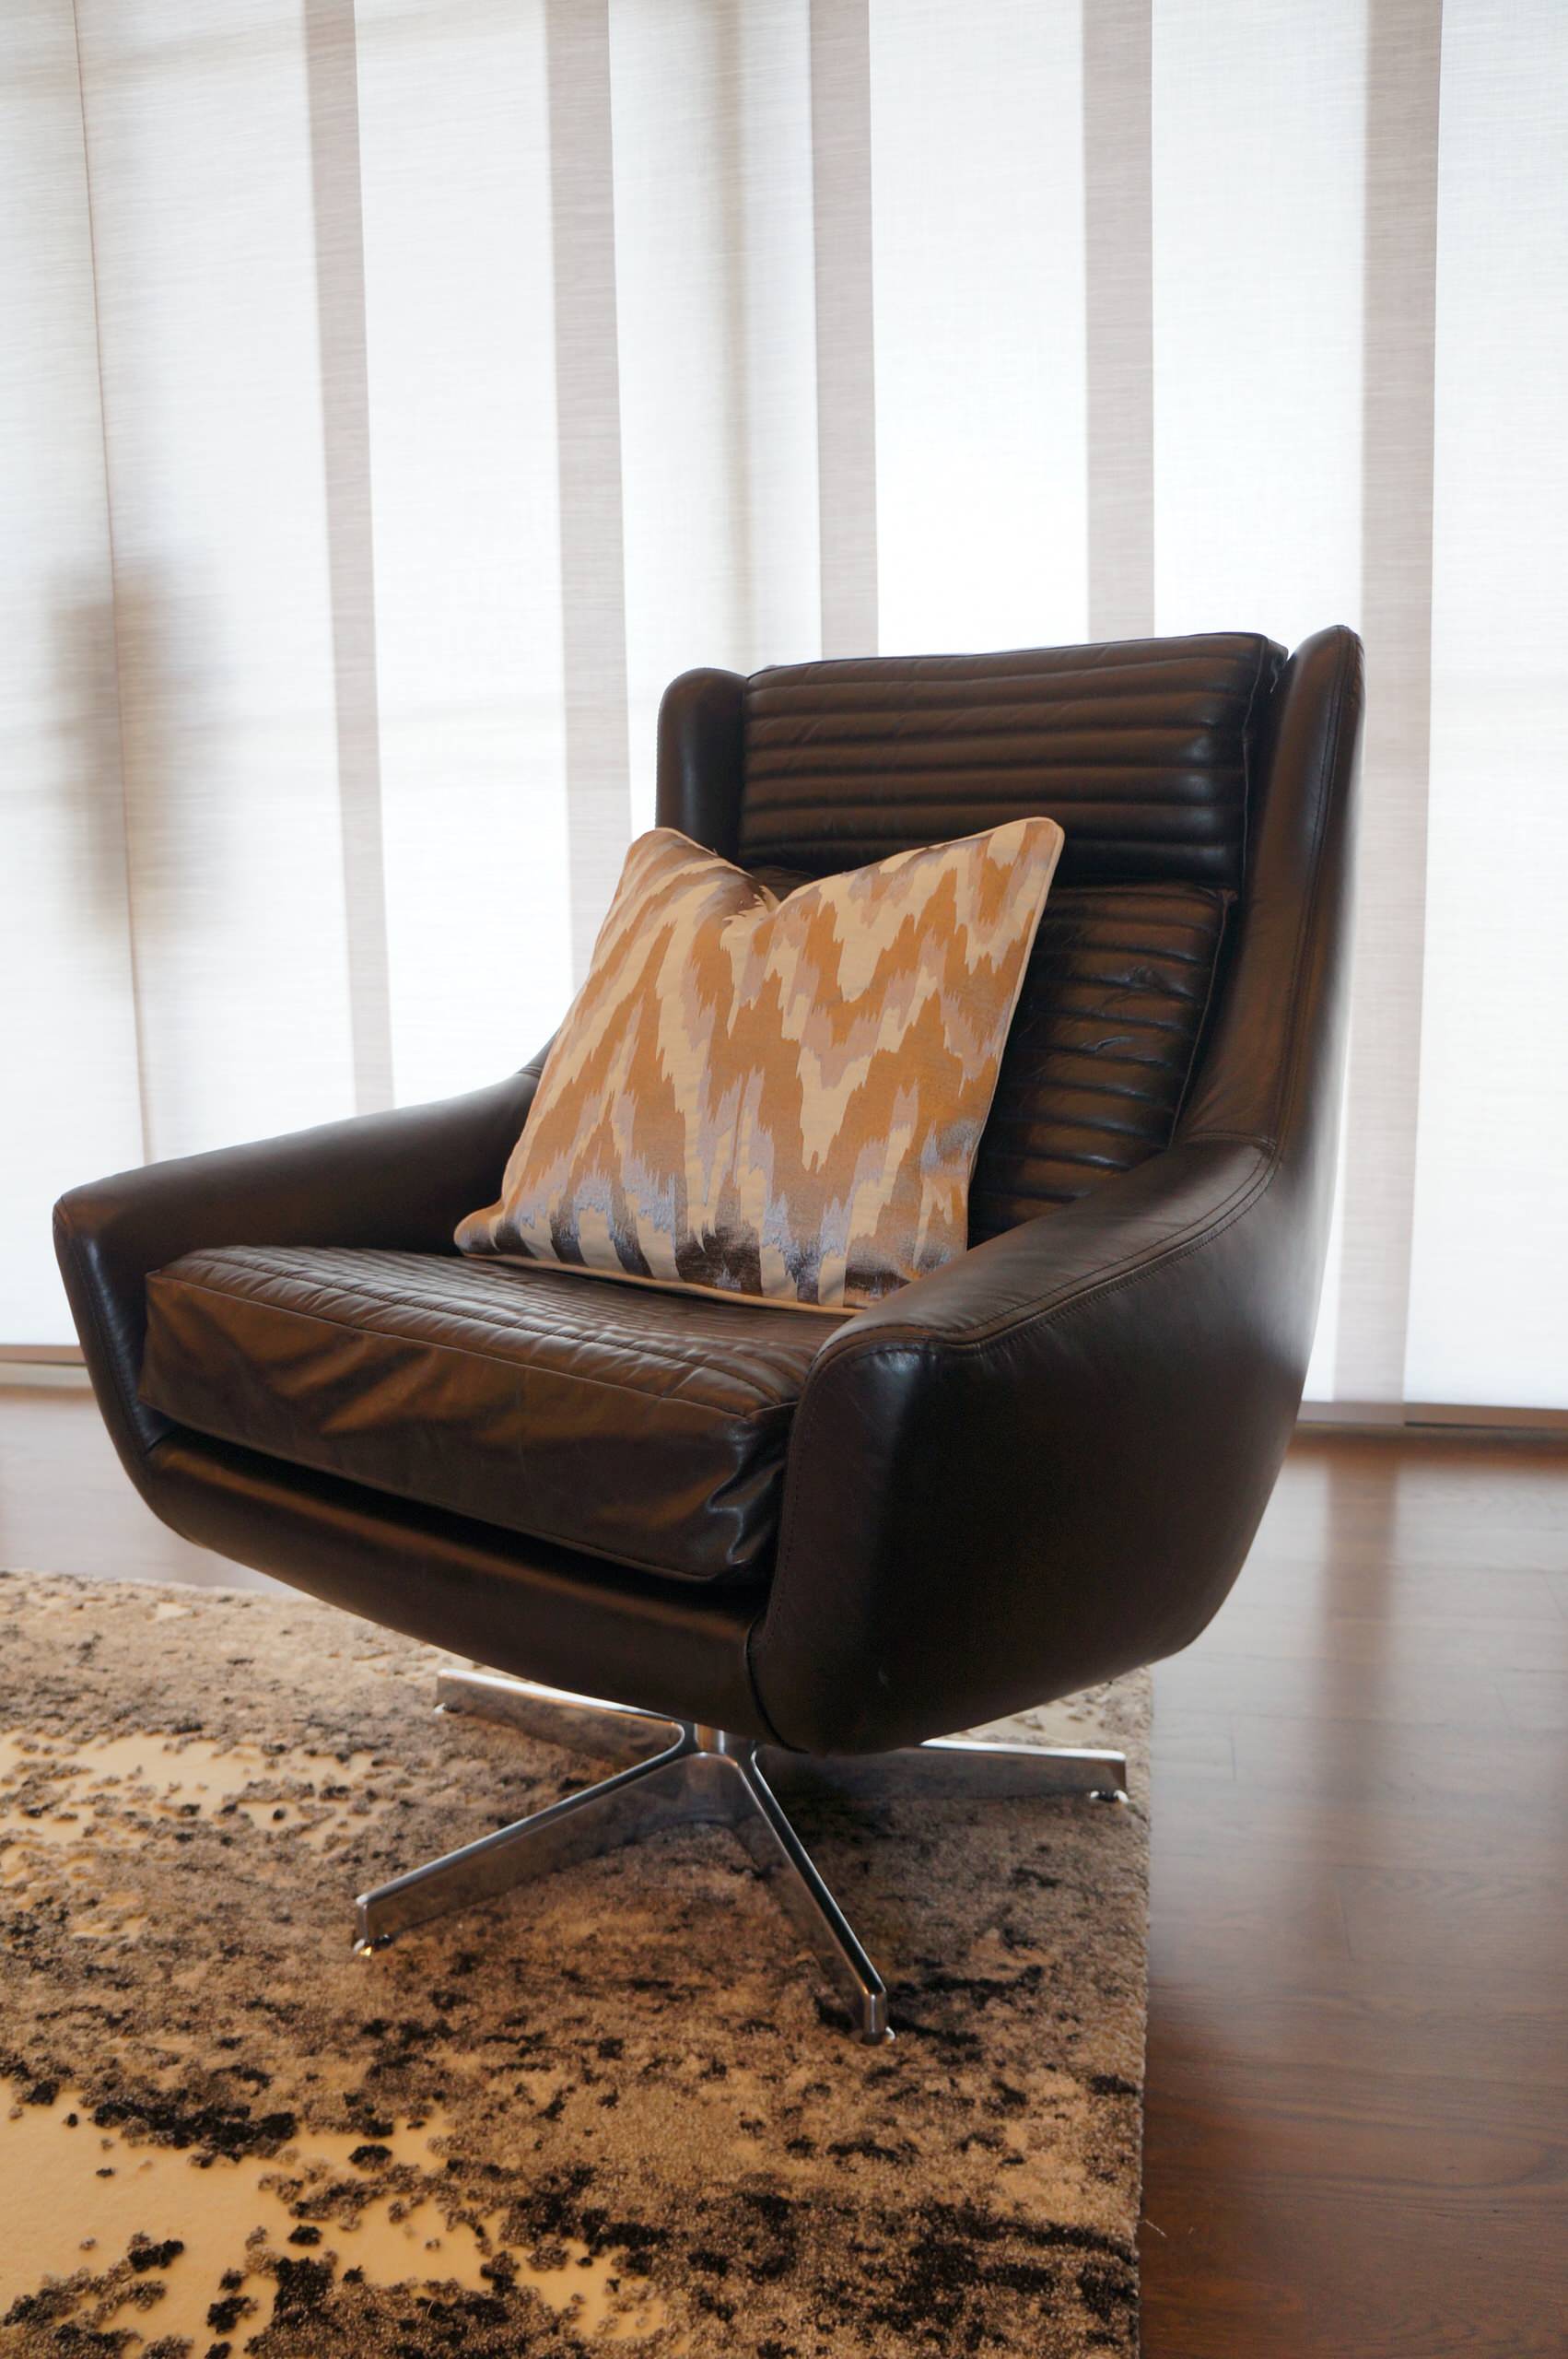 Leather swivel chair in main living area